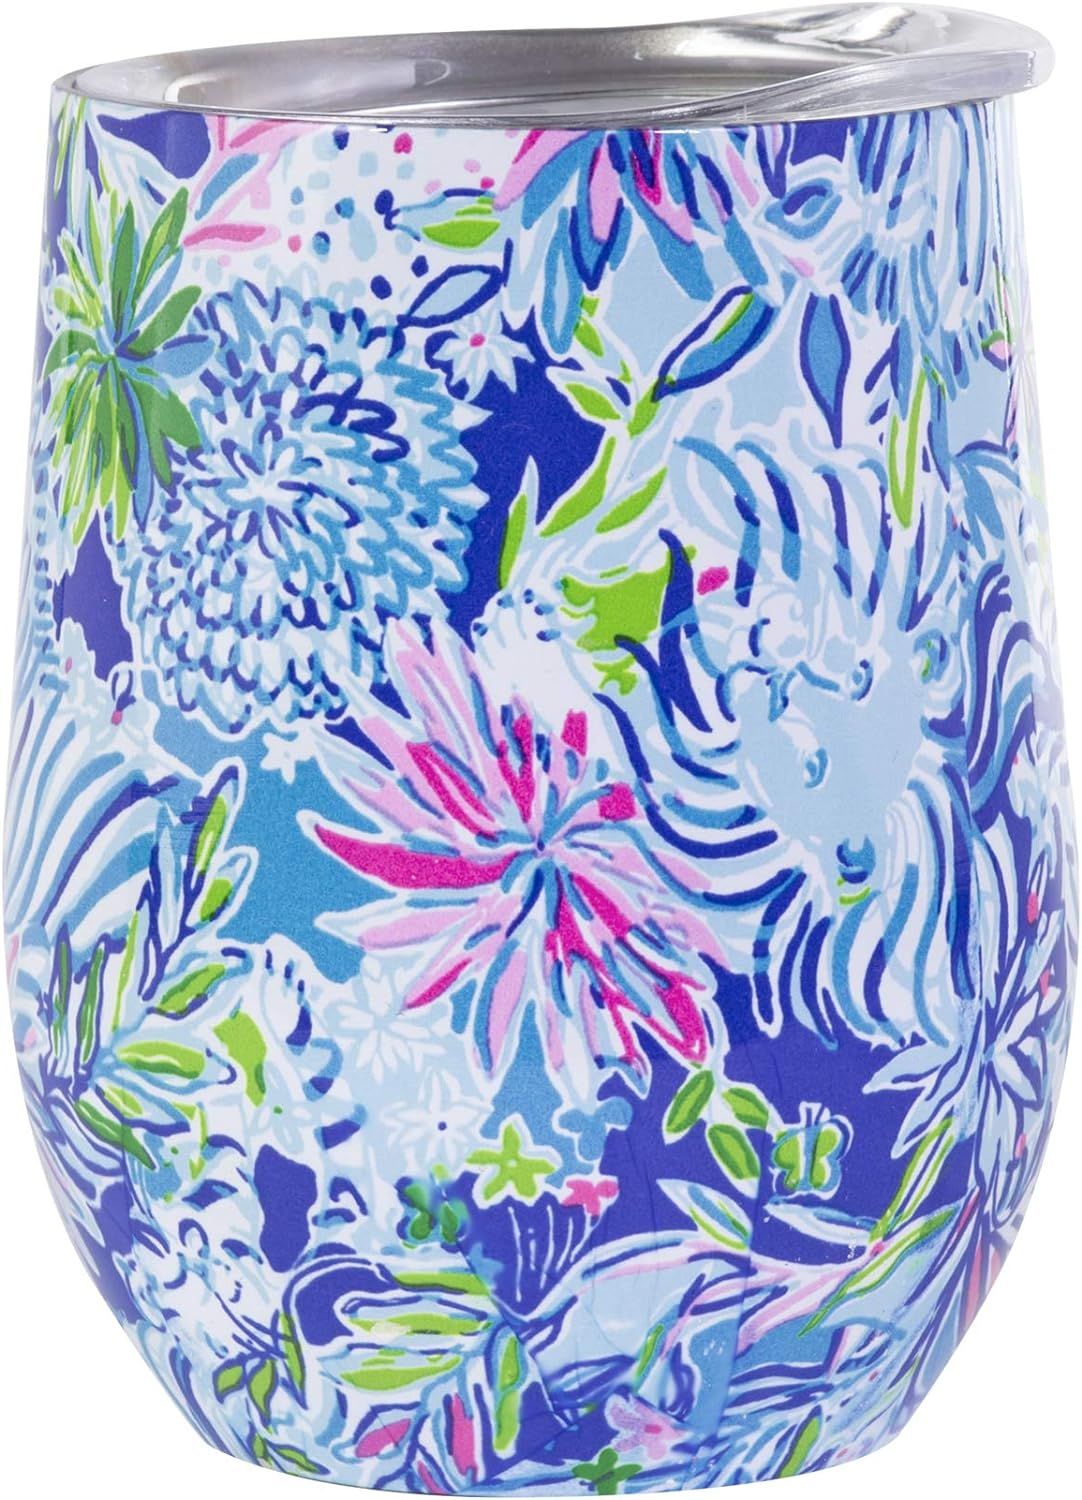 Lilly Pulitzer Stainless Steel Wine Glass Tumbler with Lid, Holds 12 Ounces, Lion Around | Amazon (US)